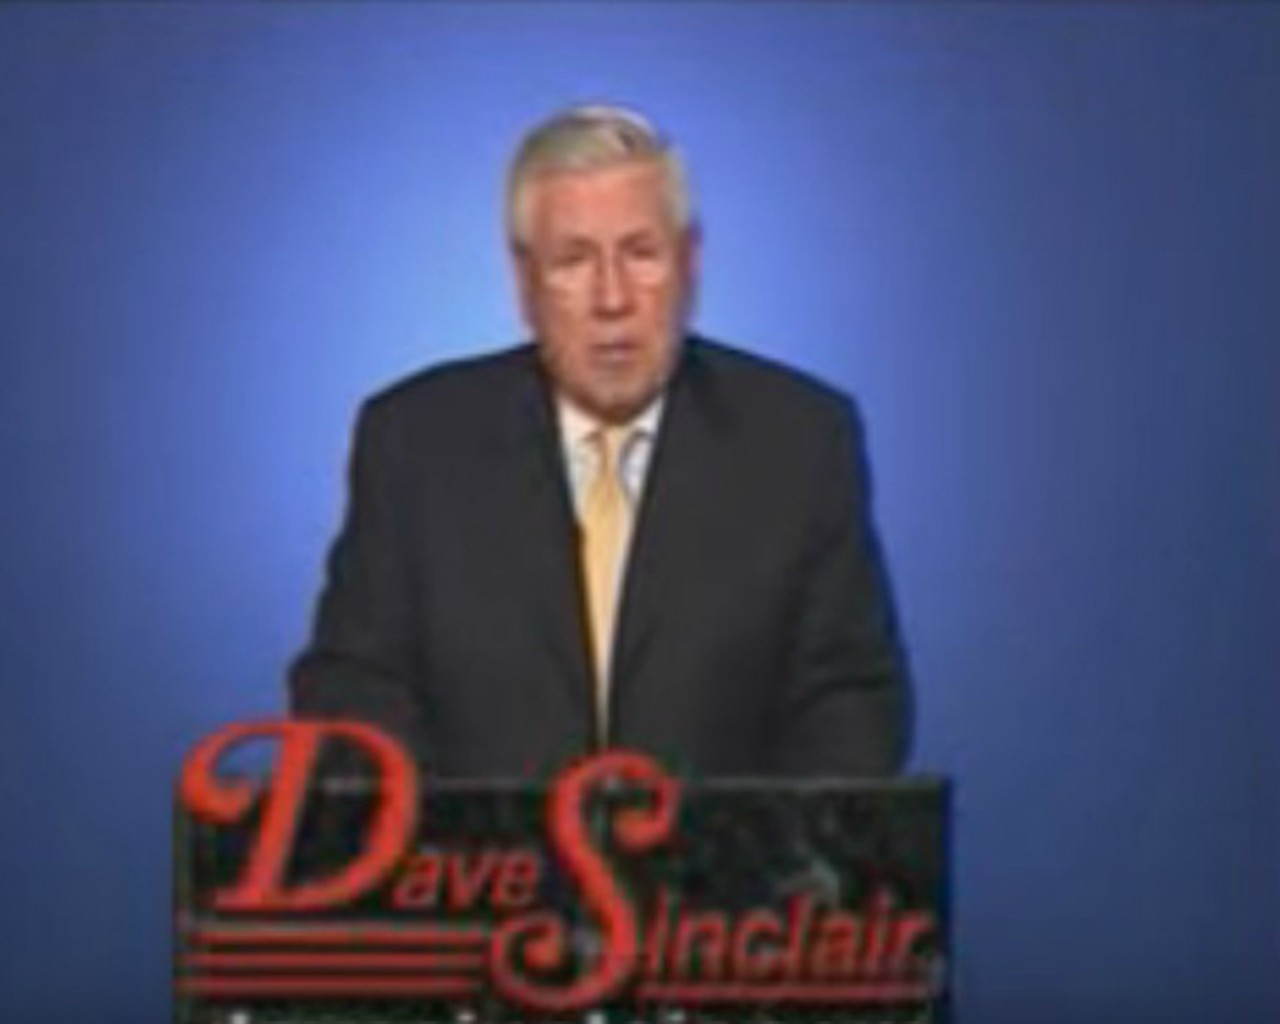 Dave Sinclair, car dealer
"If it's not right, I'll make it right."
Photo credit: screengrab from YouTube